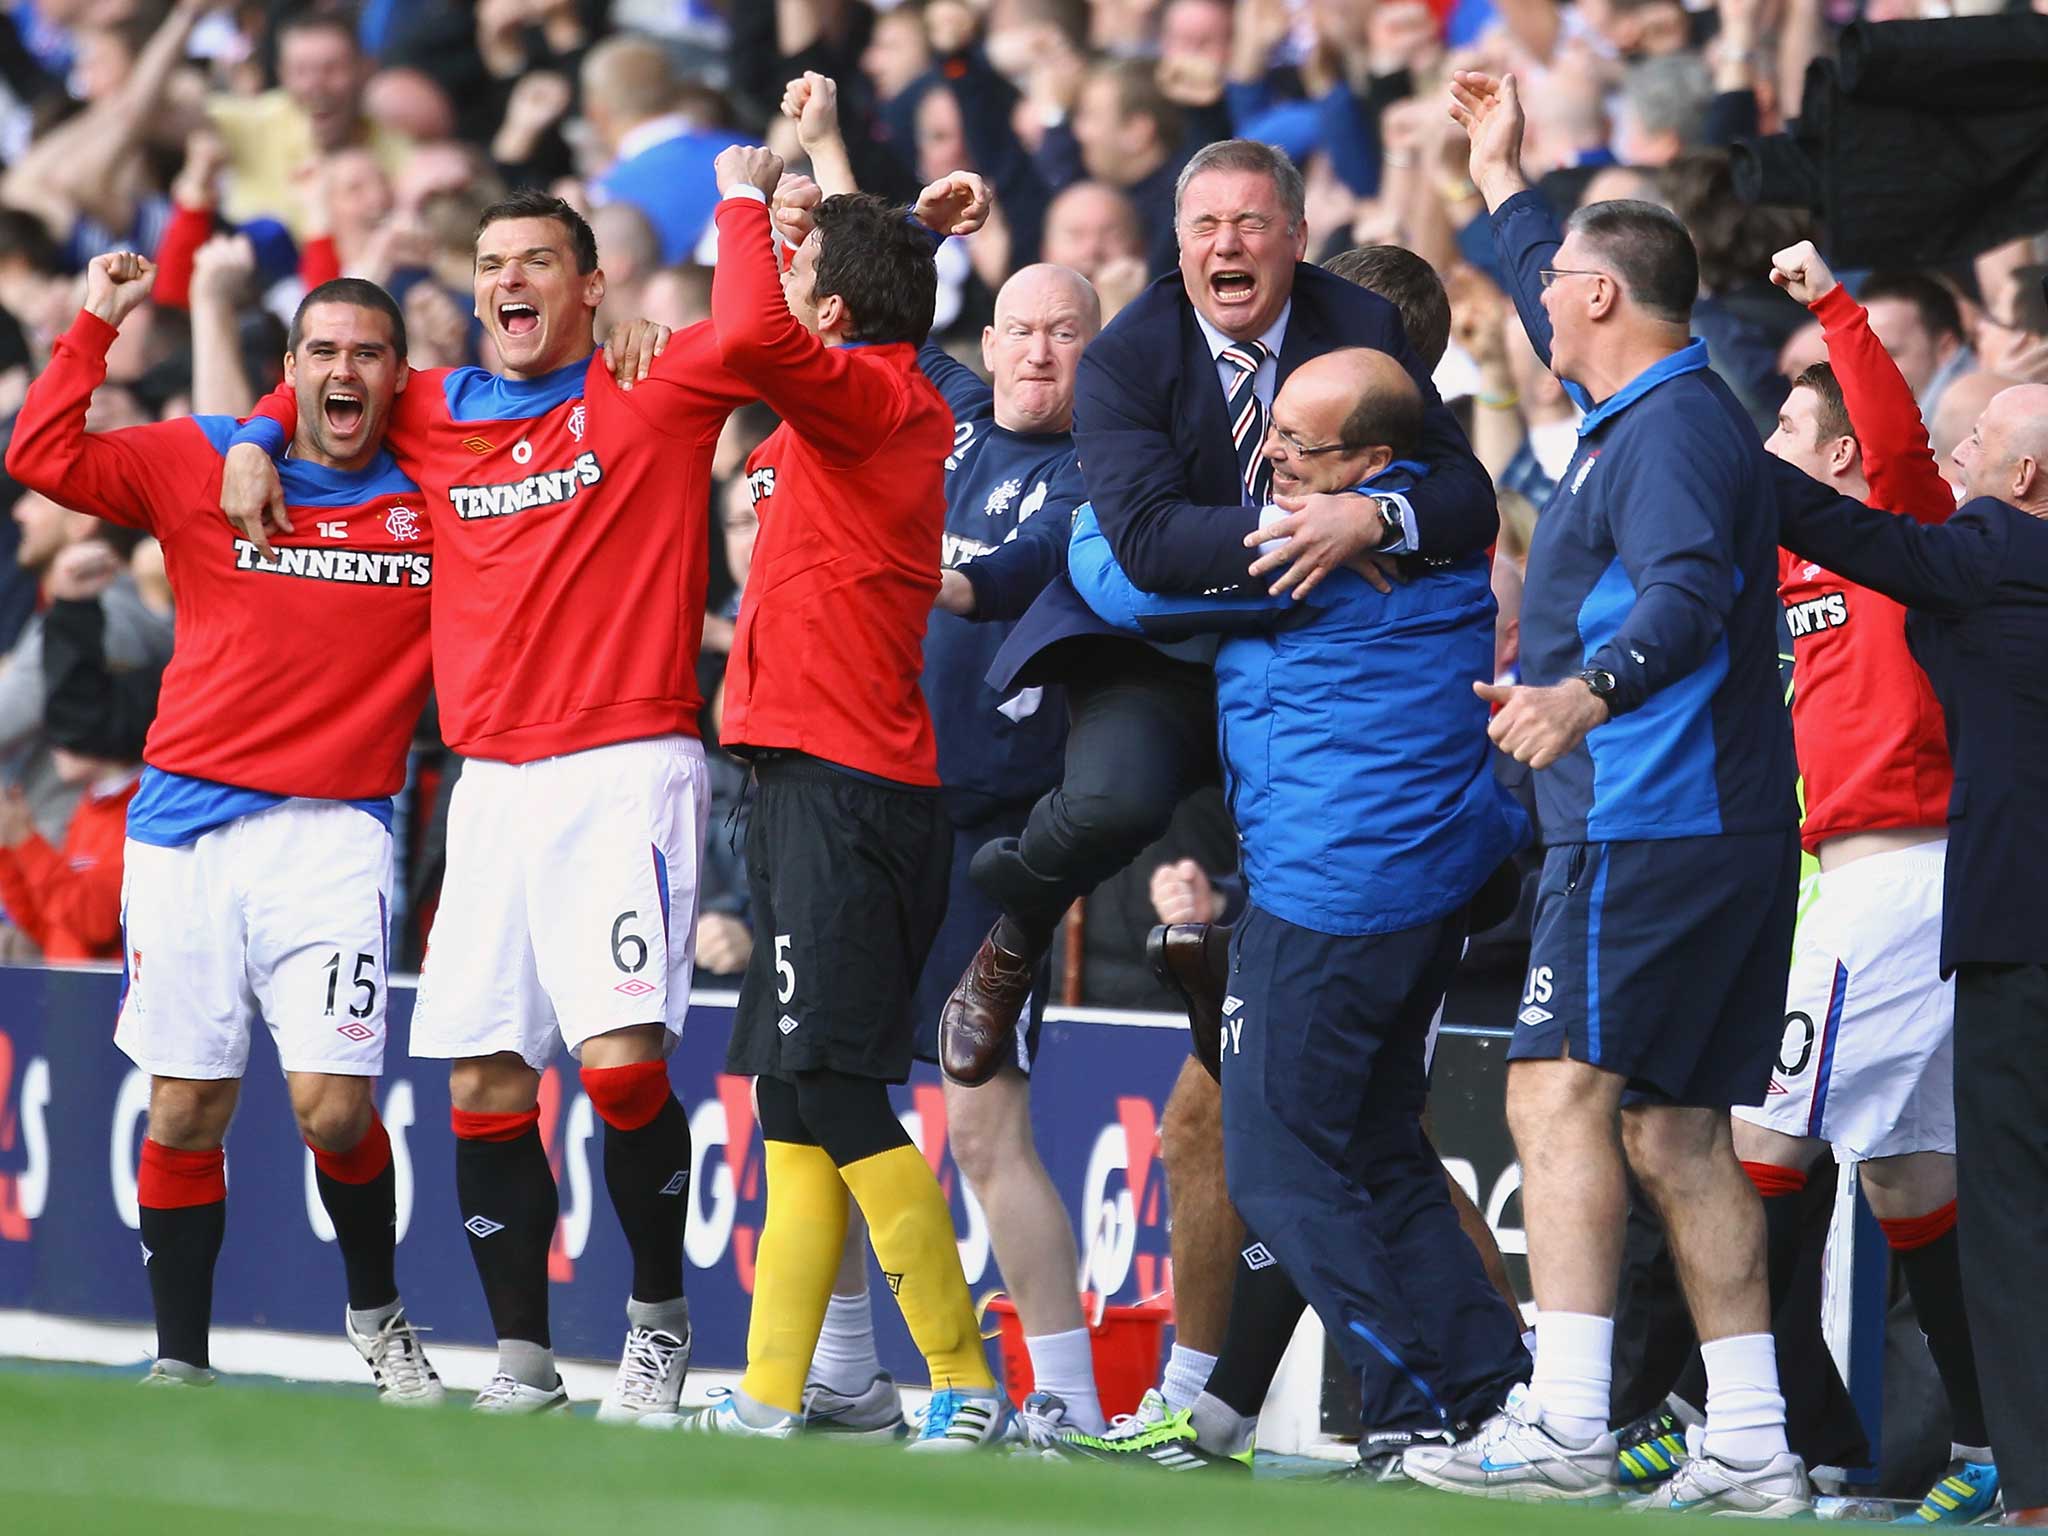 Rangers' journey back to the Premiership took one year longer than planned